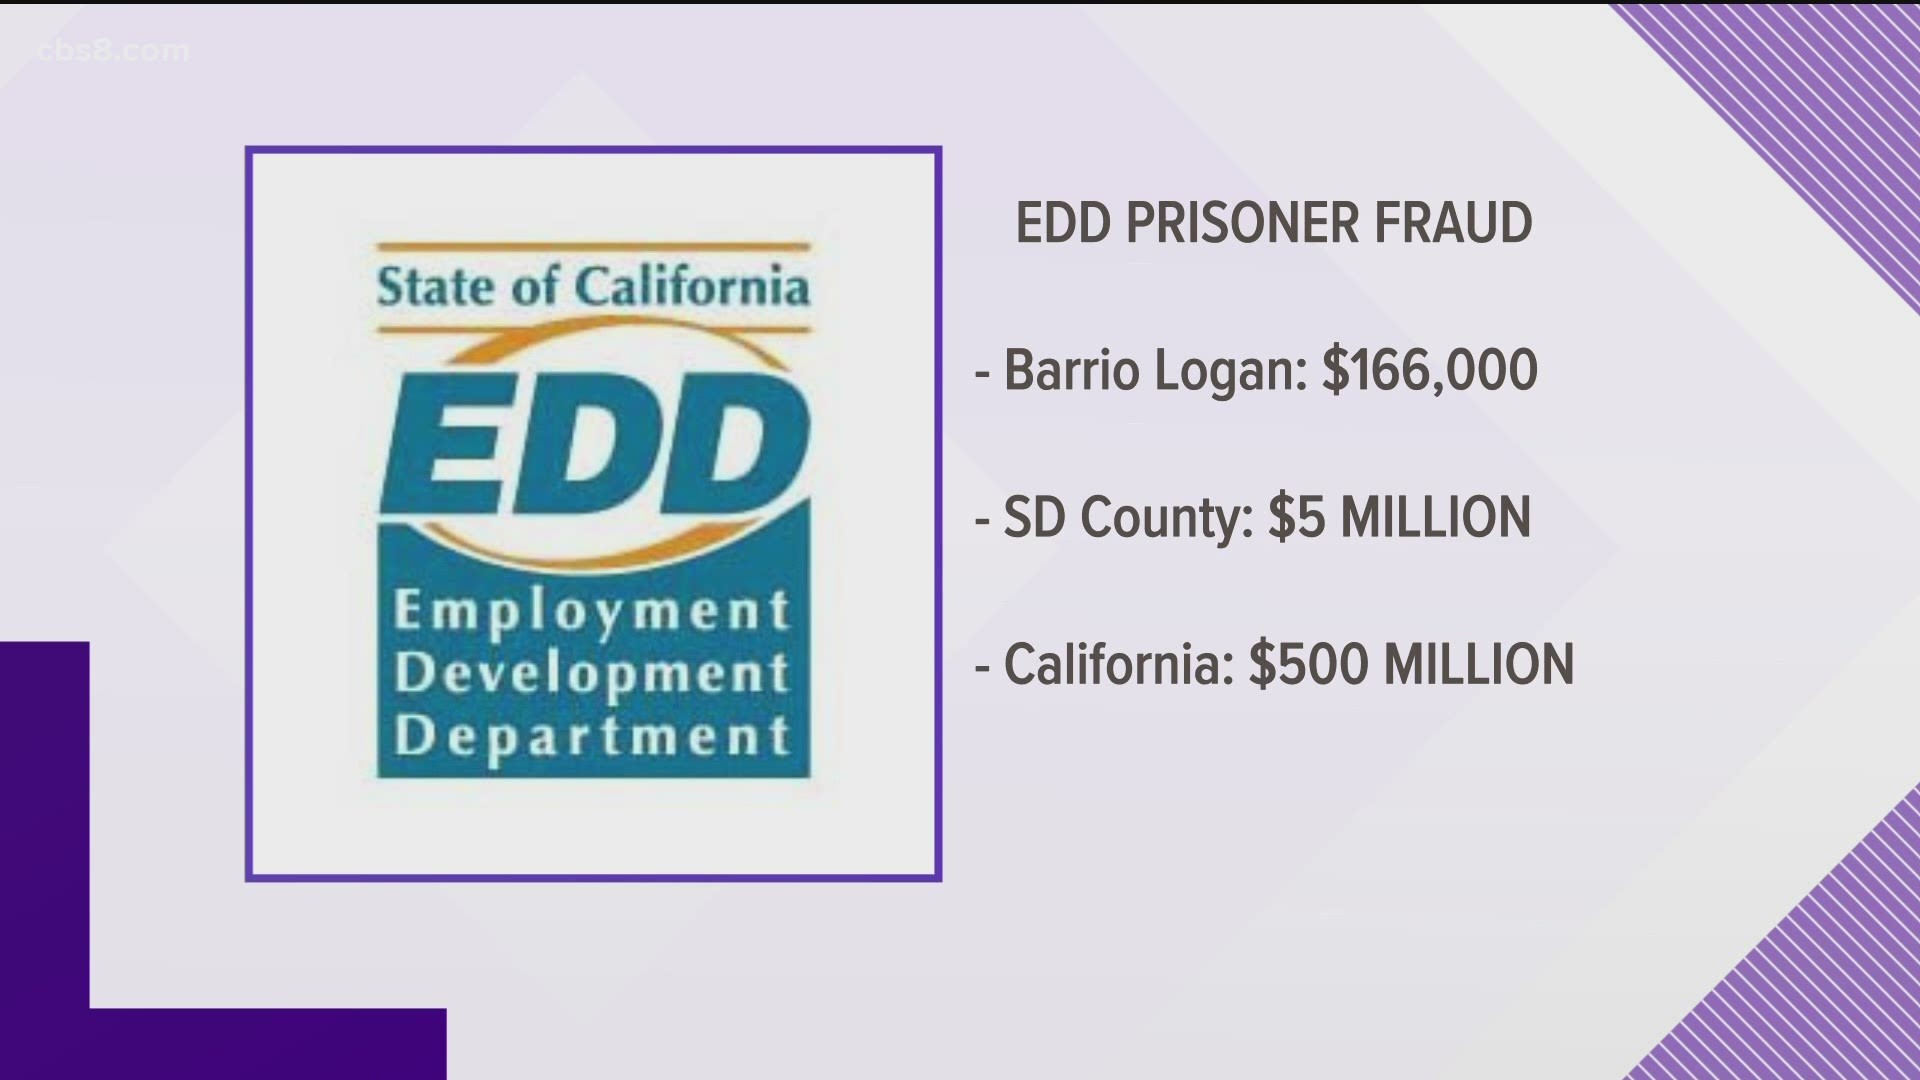 The San Diego County DA's office alleges the inmates lied on application forms to the Employment Development Department.